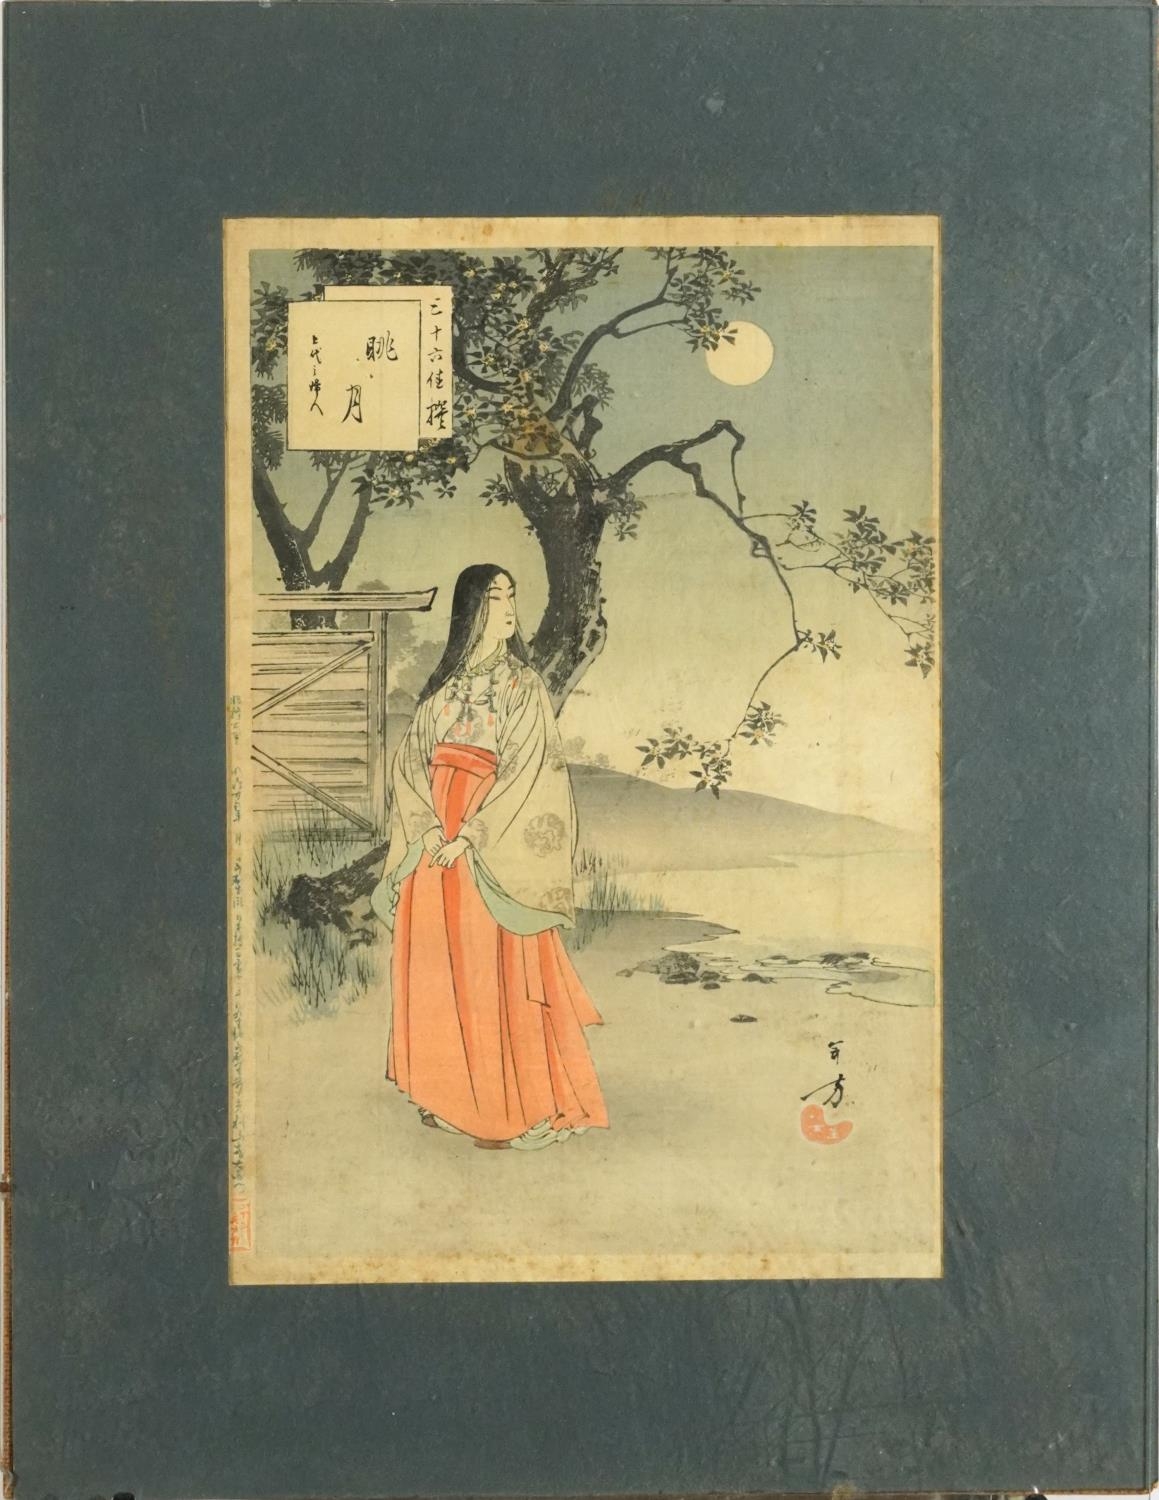 After Toshikata Mizuno - Geisha in a landscape, Japanese woodblock print with character marks, label - Image 2 of 5